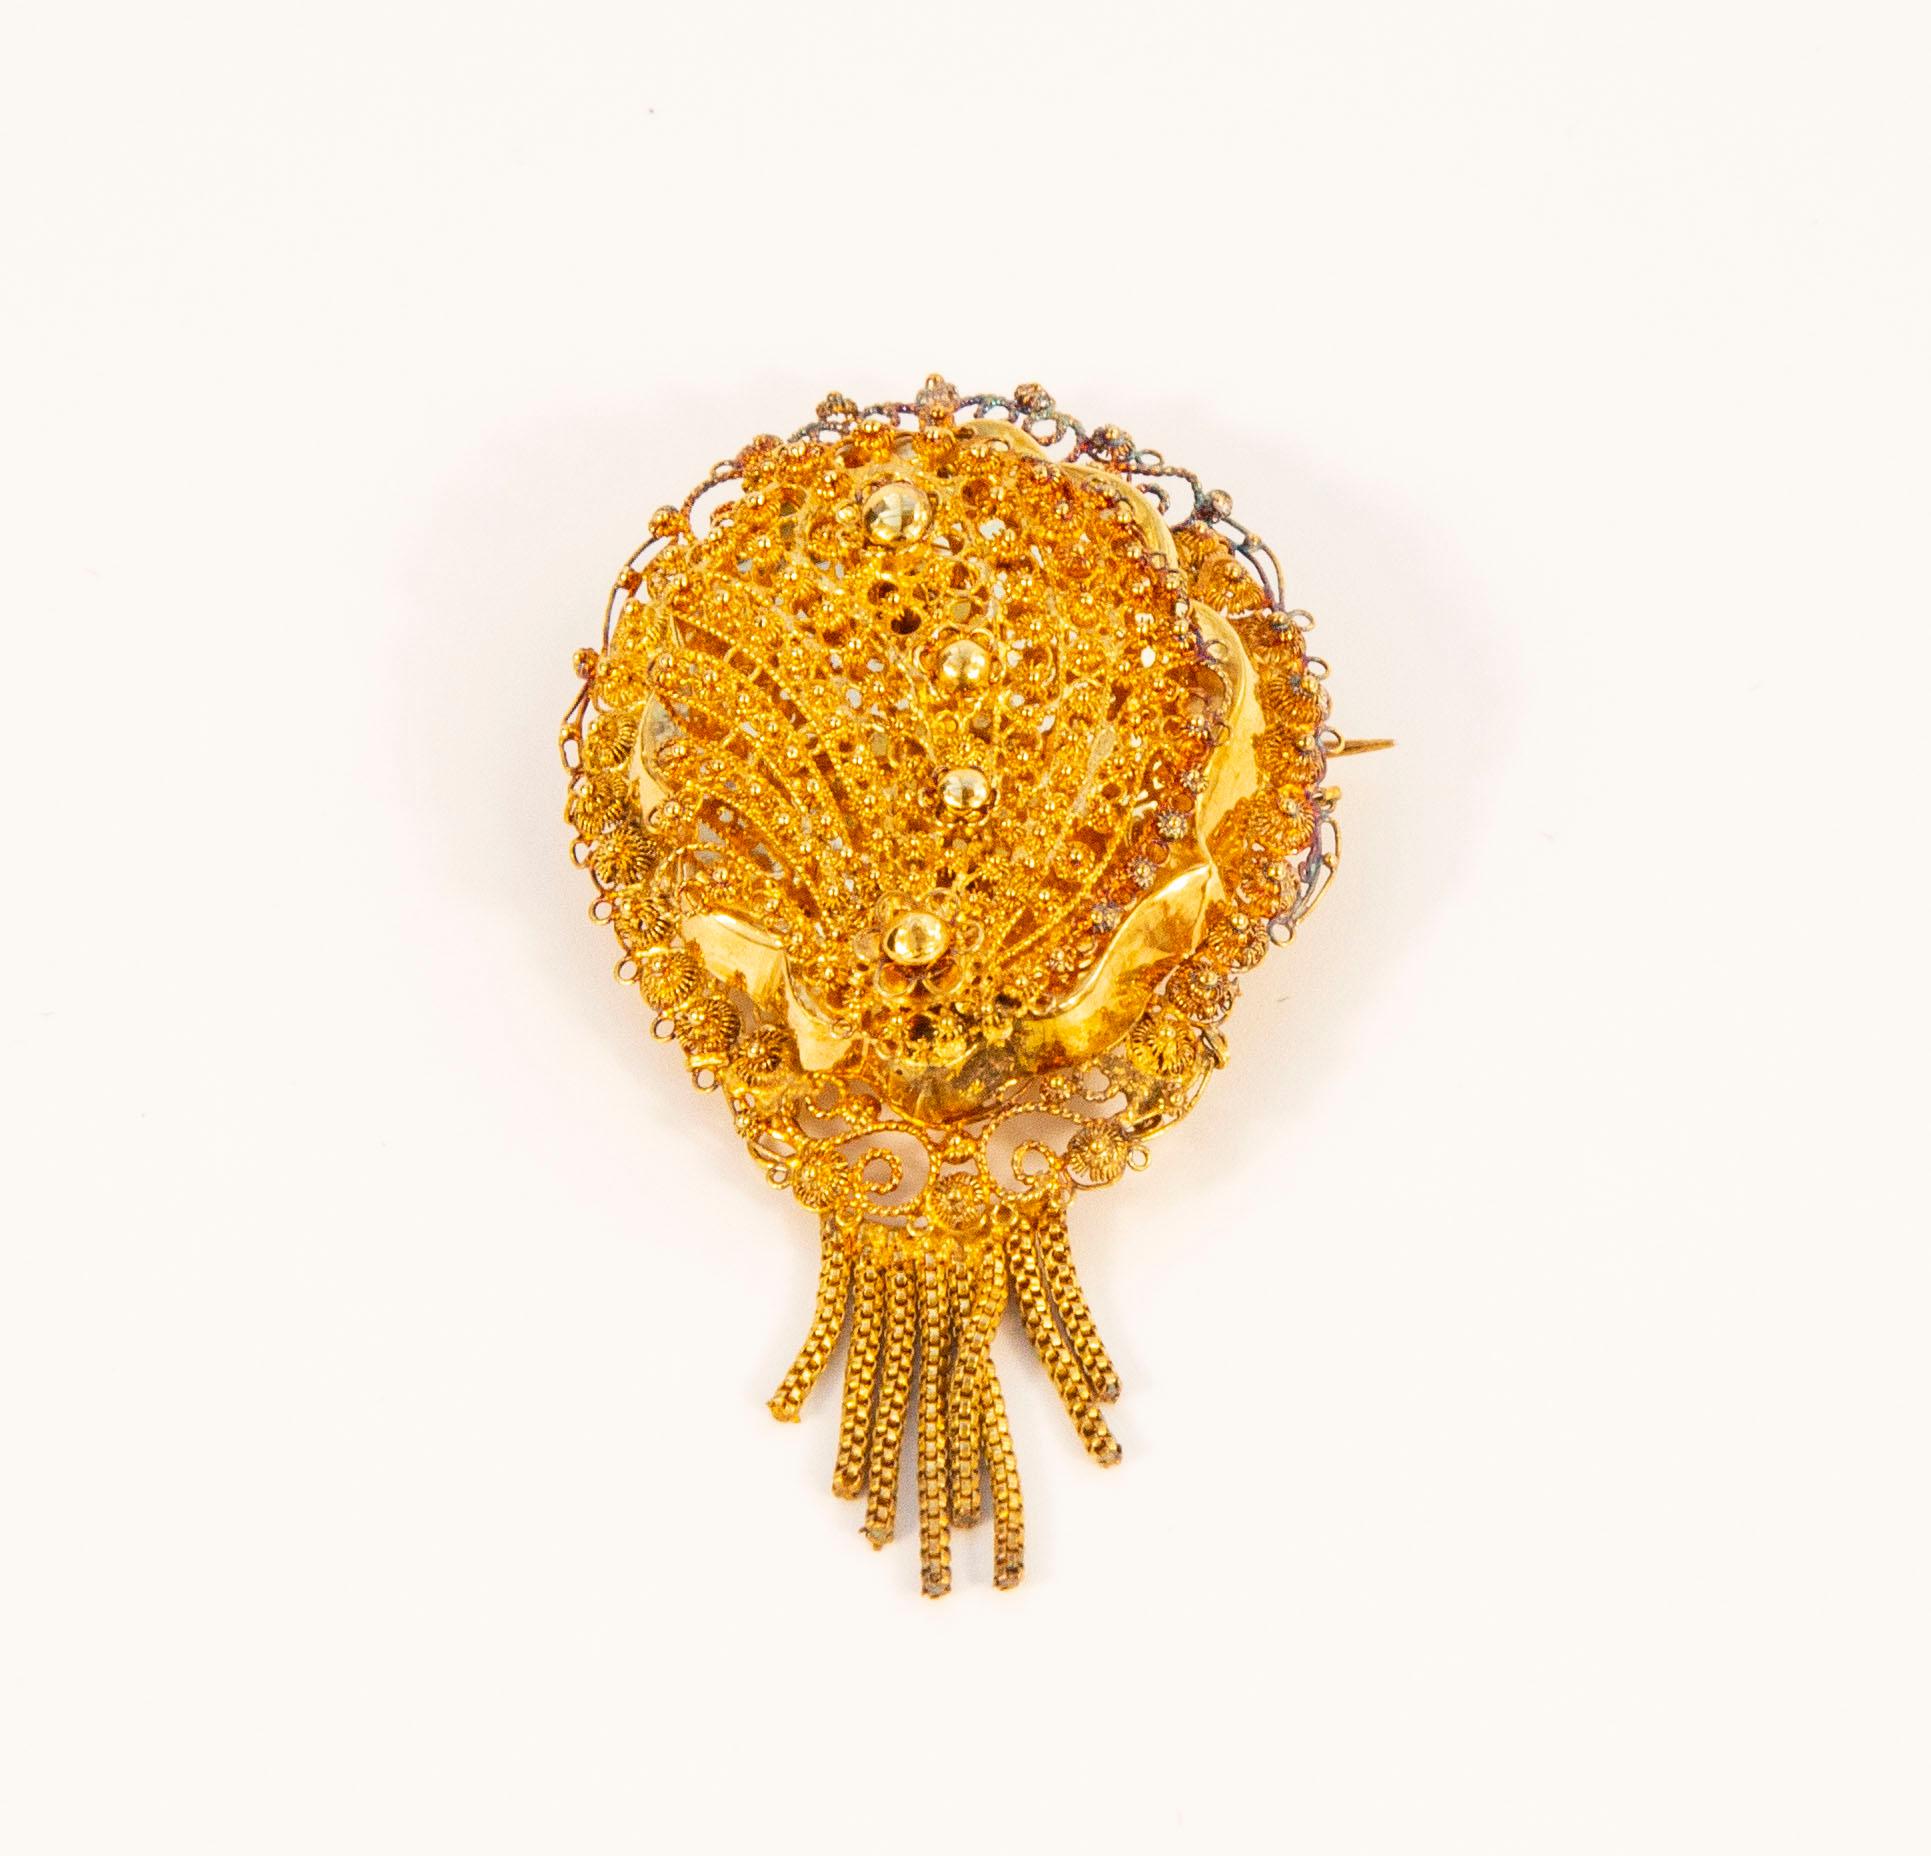 An antique Victorian Dutch 14 karat yellow gold pendant/brooch made with filigree technique. The filigree technique is a very refined method that uses a thin golden thread to form a lace-like pattern and fine embroidery. Each item features very